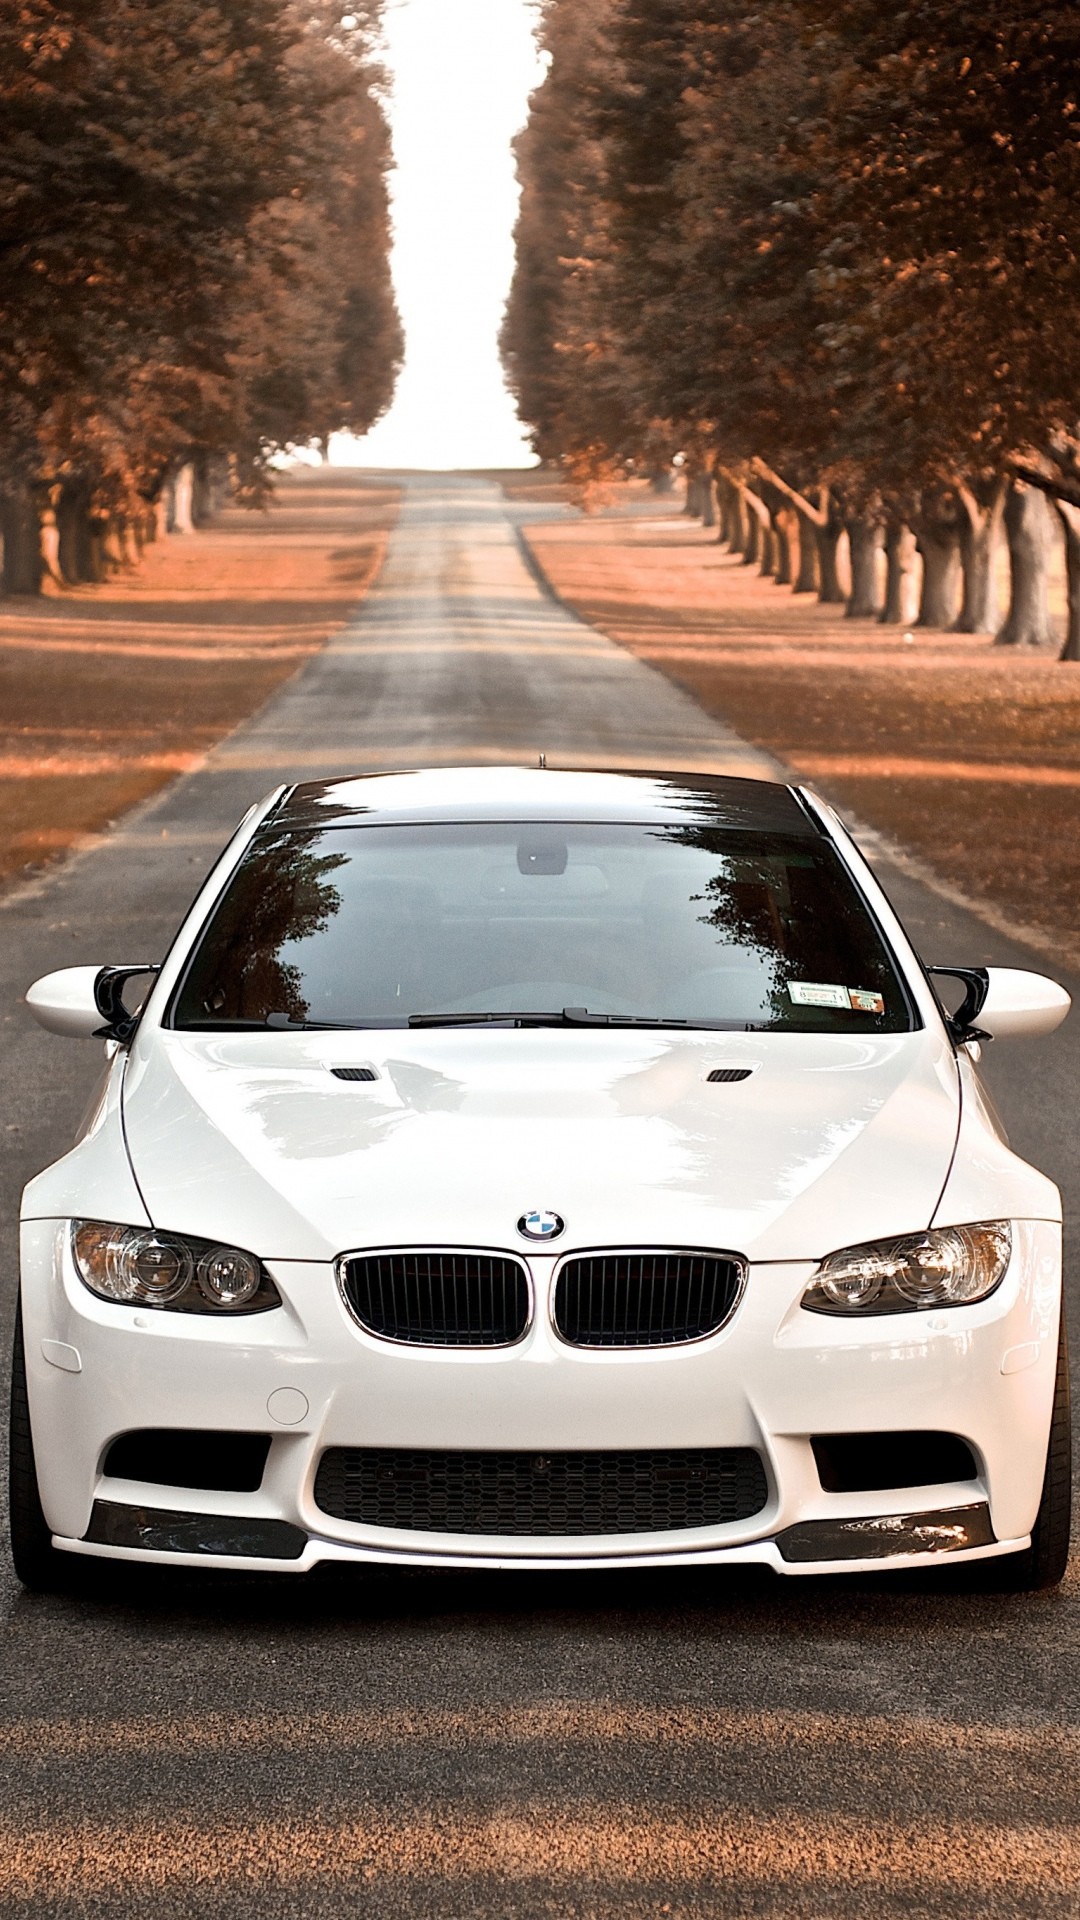 BMW M3 iPhone Wallpaper (71+ images)